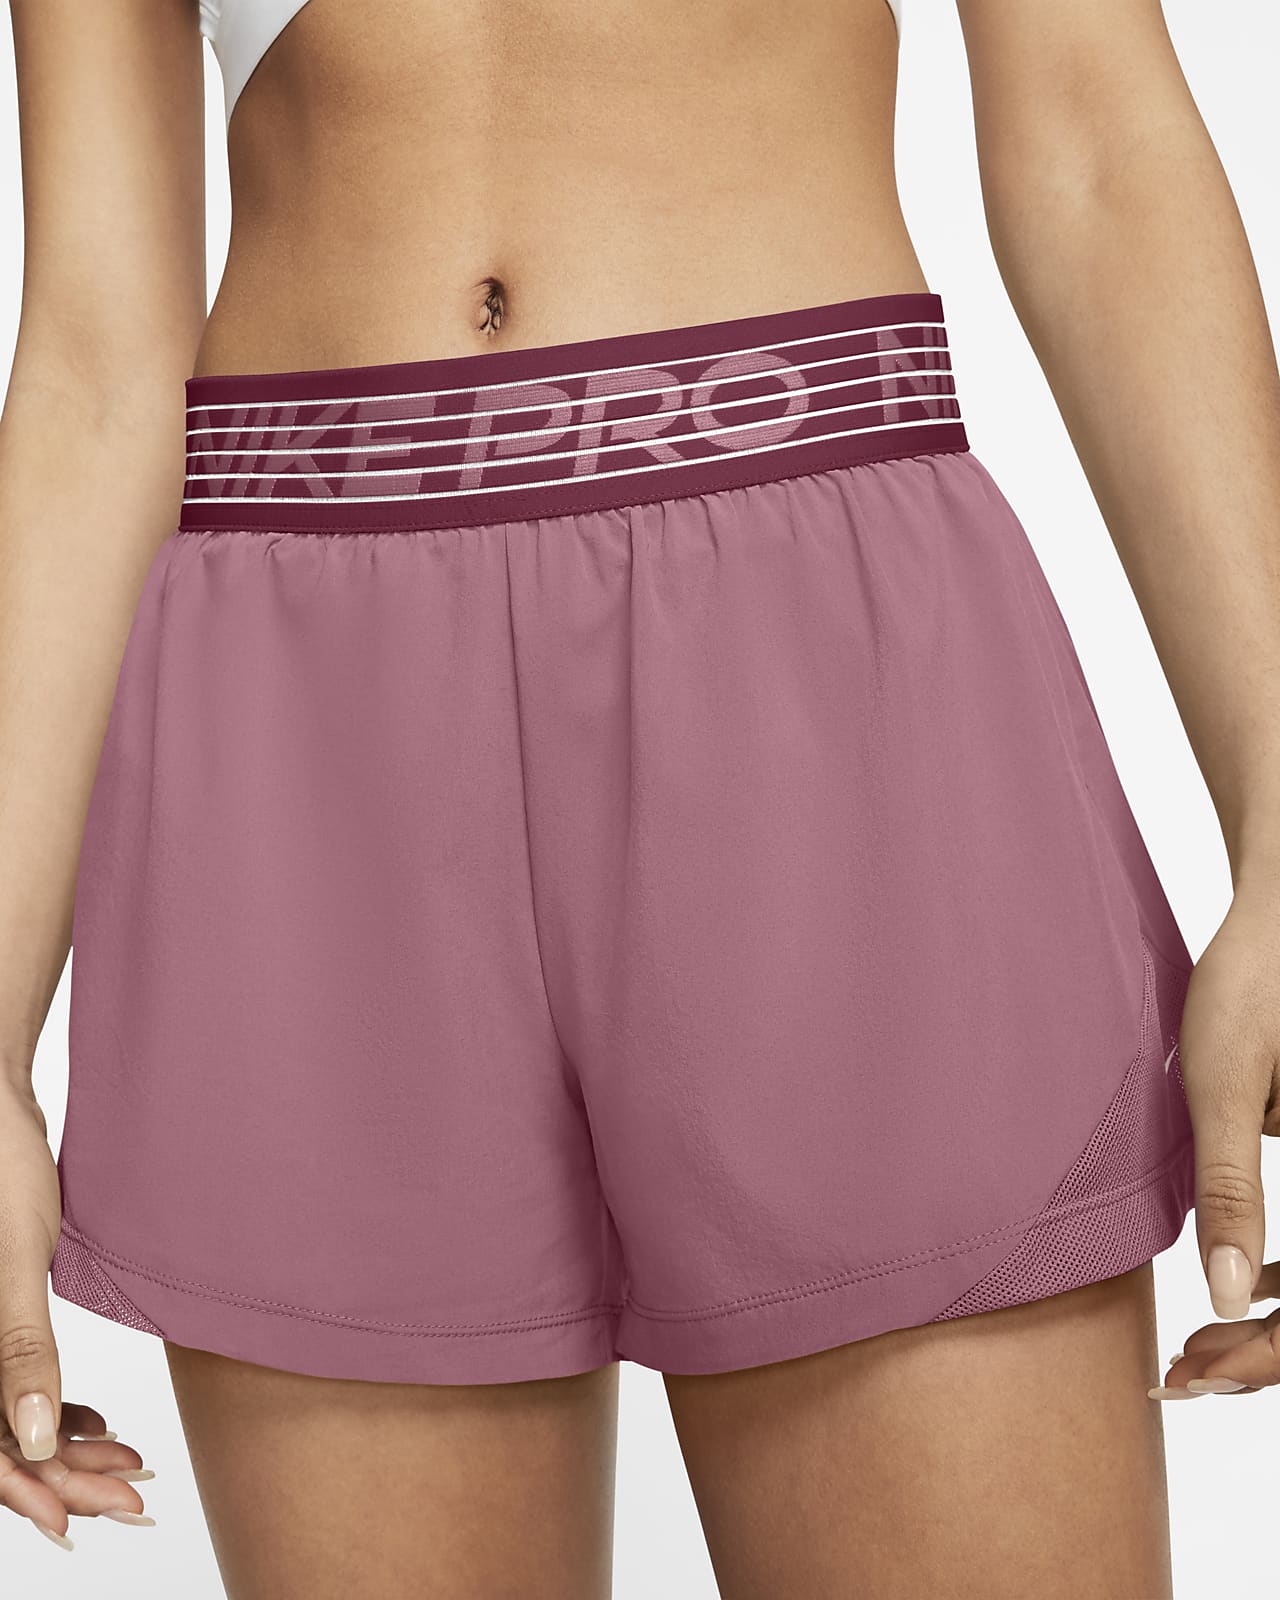 nike 2 in 1 shorts pink